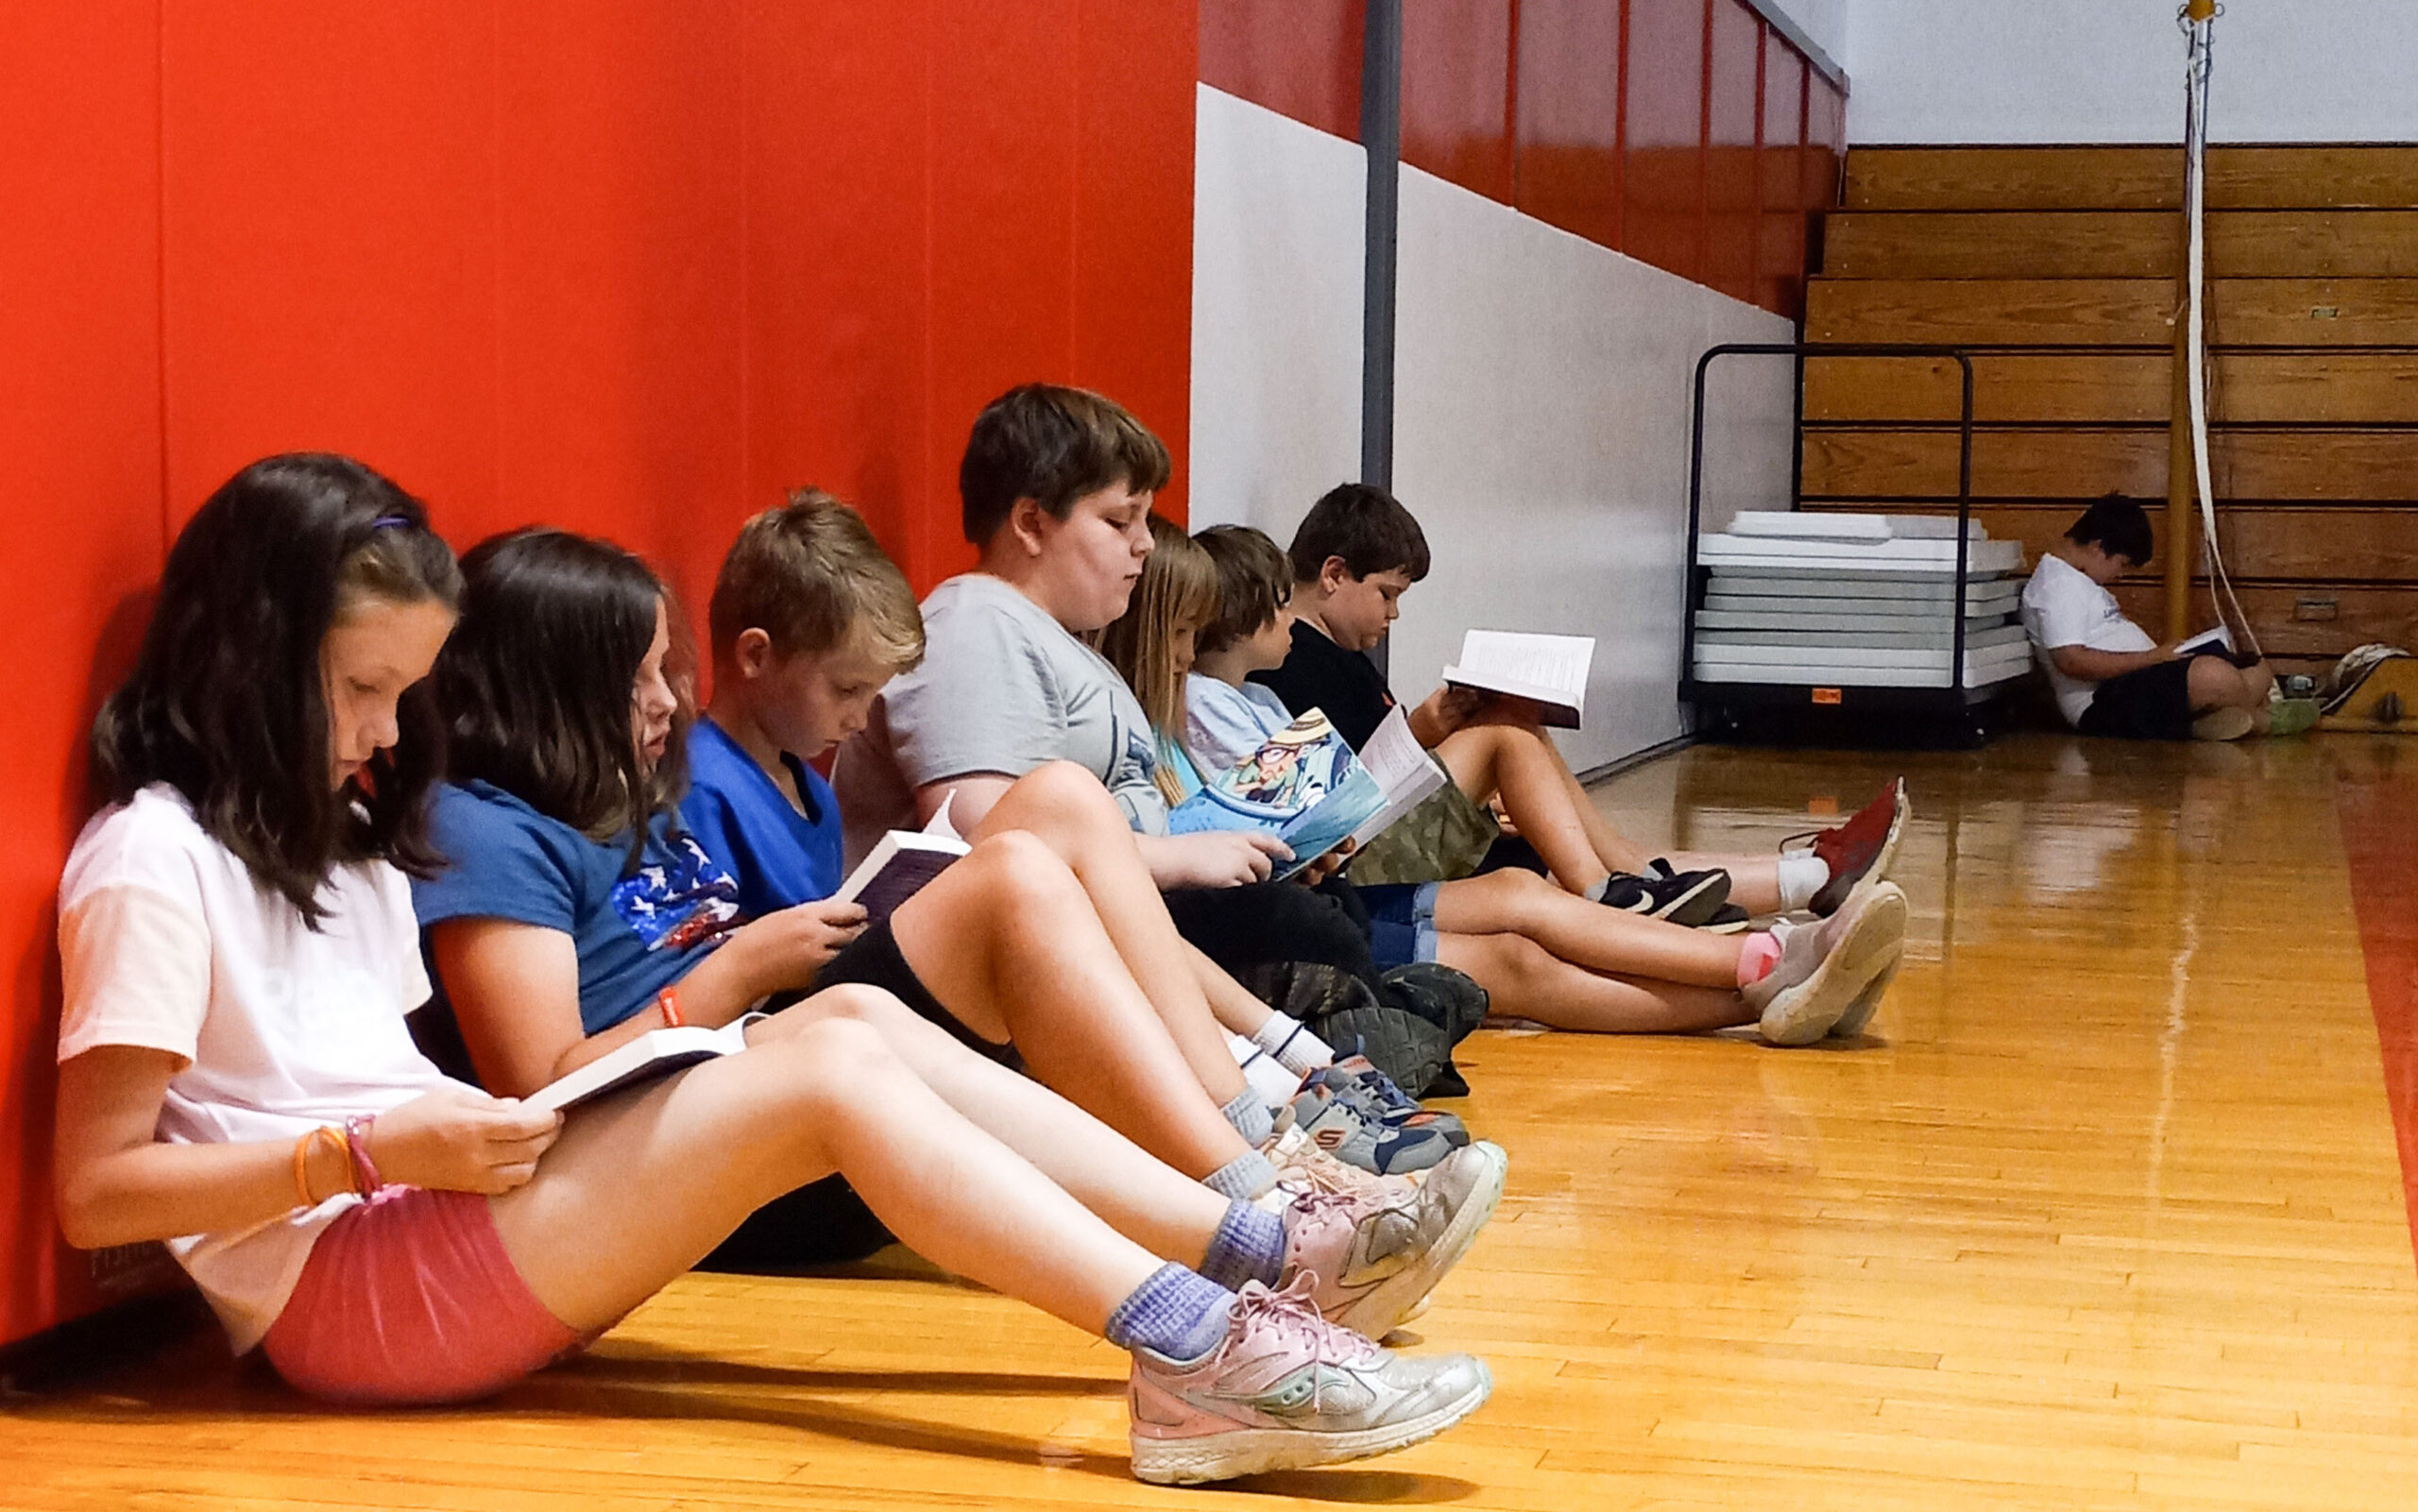 A color photo of 8 students reading in a school gym